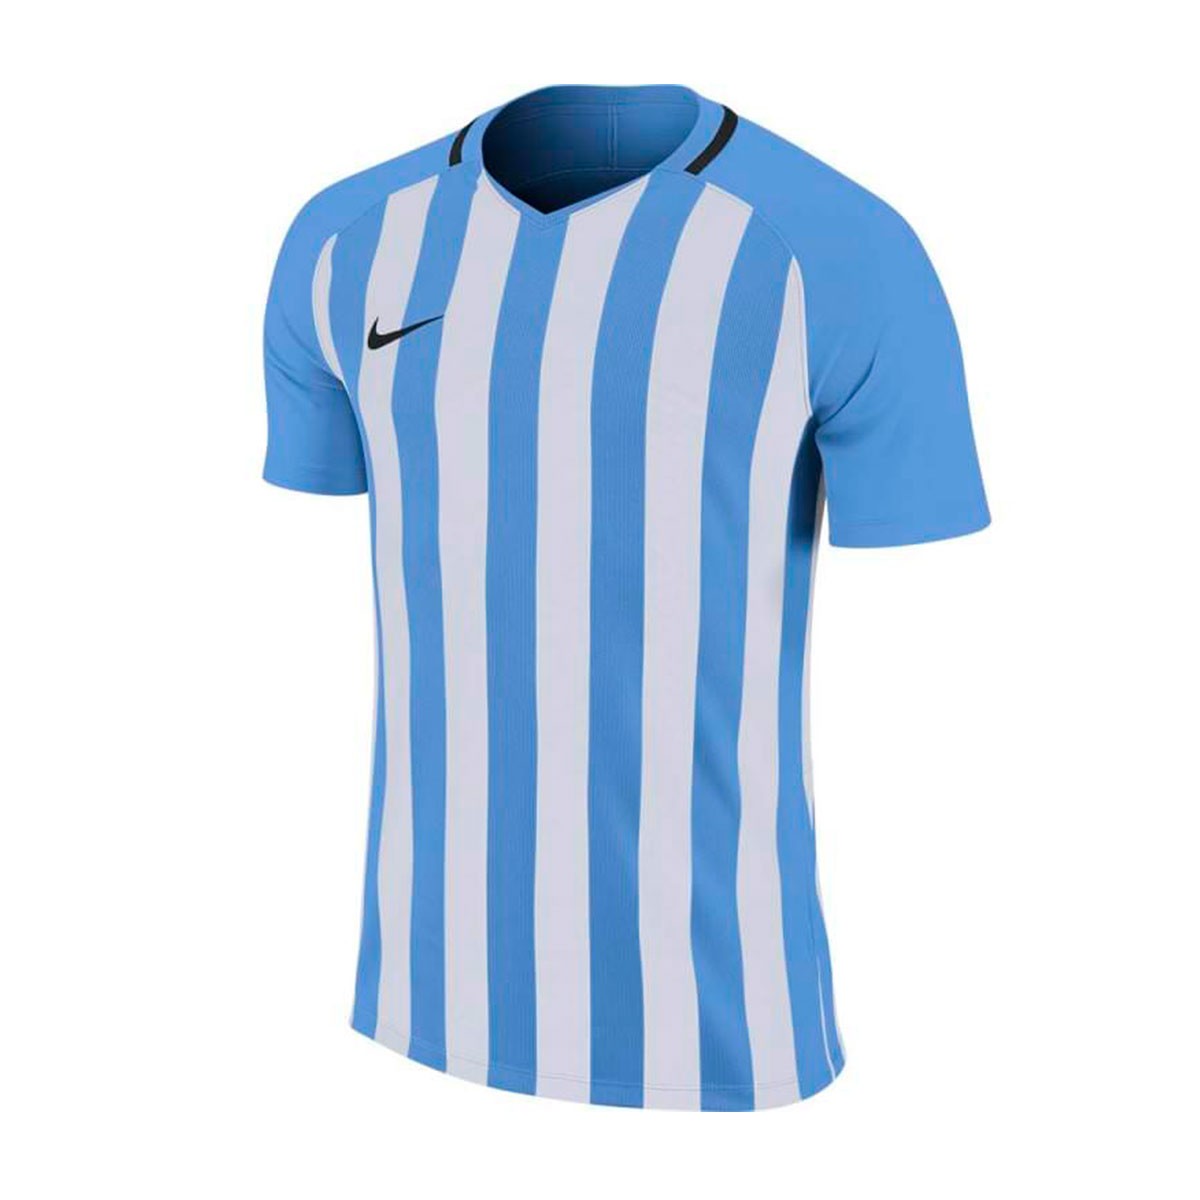 football jersey blue and white